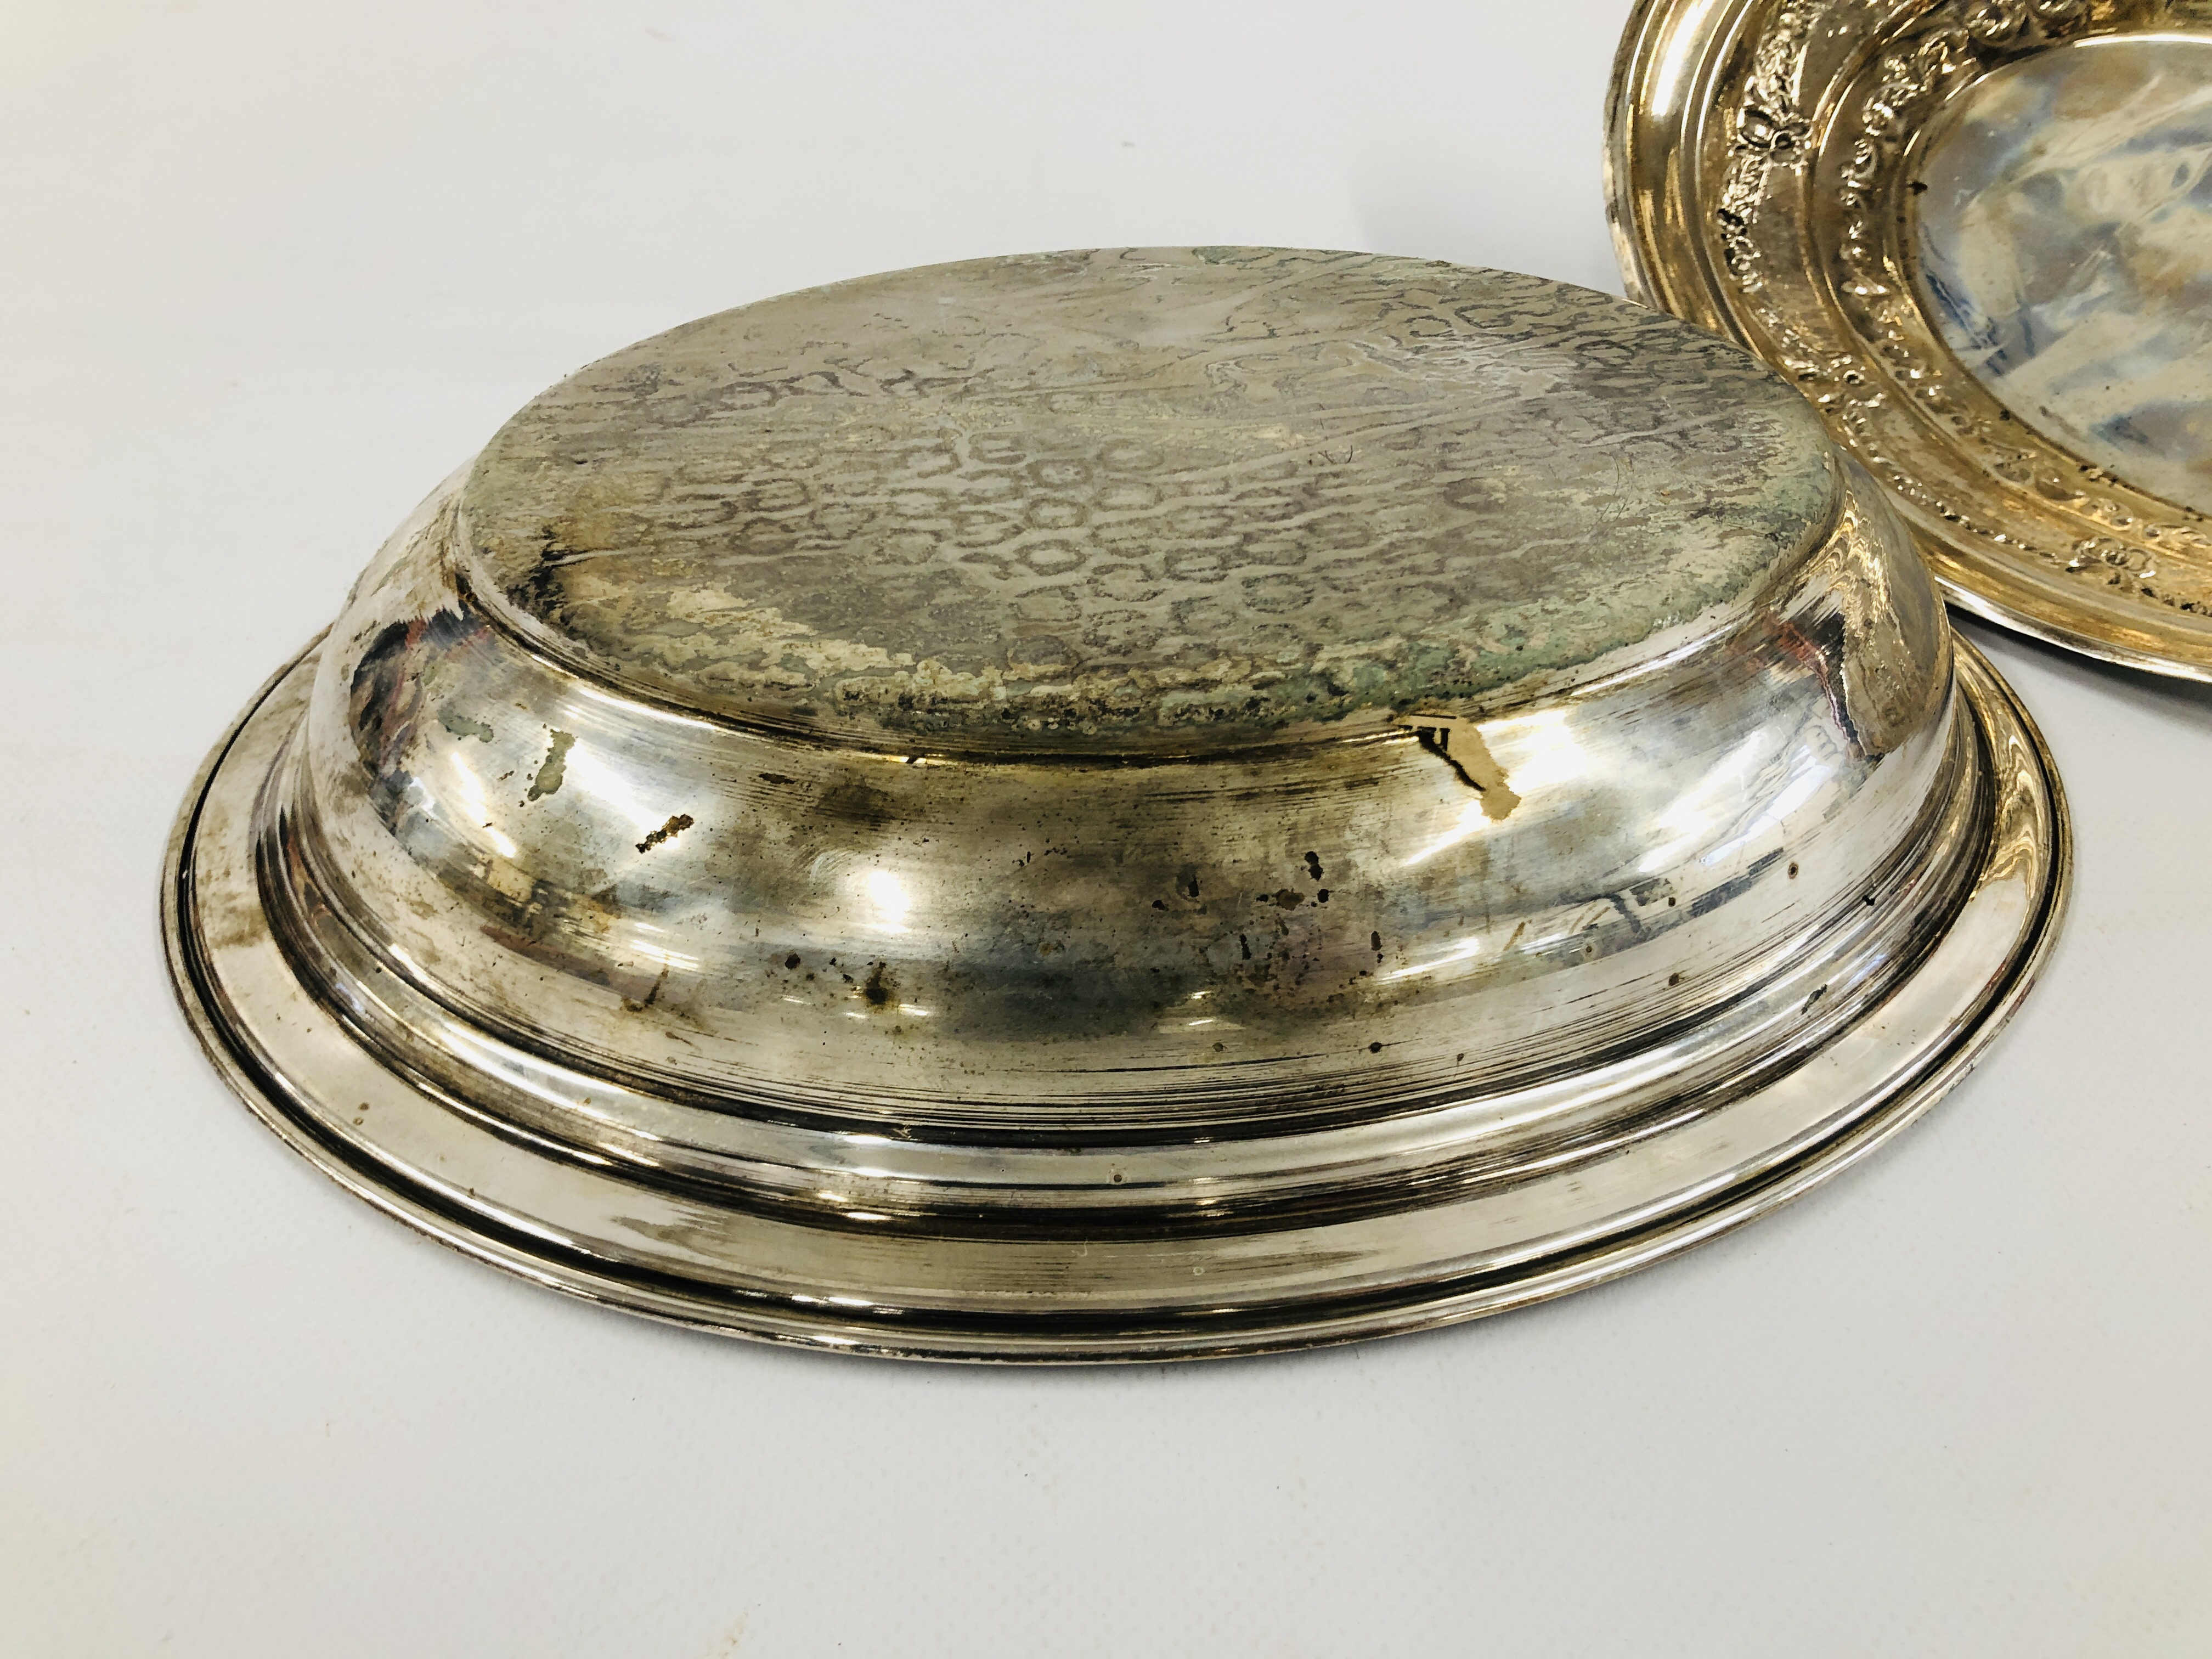 A CONTINENTAL SILVER OVAL TUREEN AND COVER, DECORATED WITH GARLANDS, BASE STAMPED 900, L 30. - Image 11 of 13